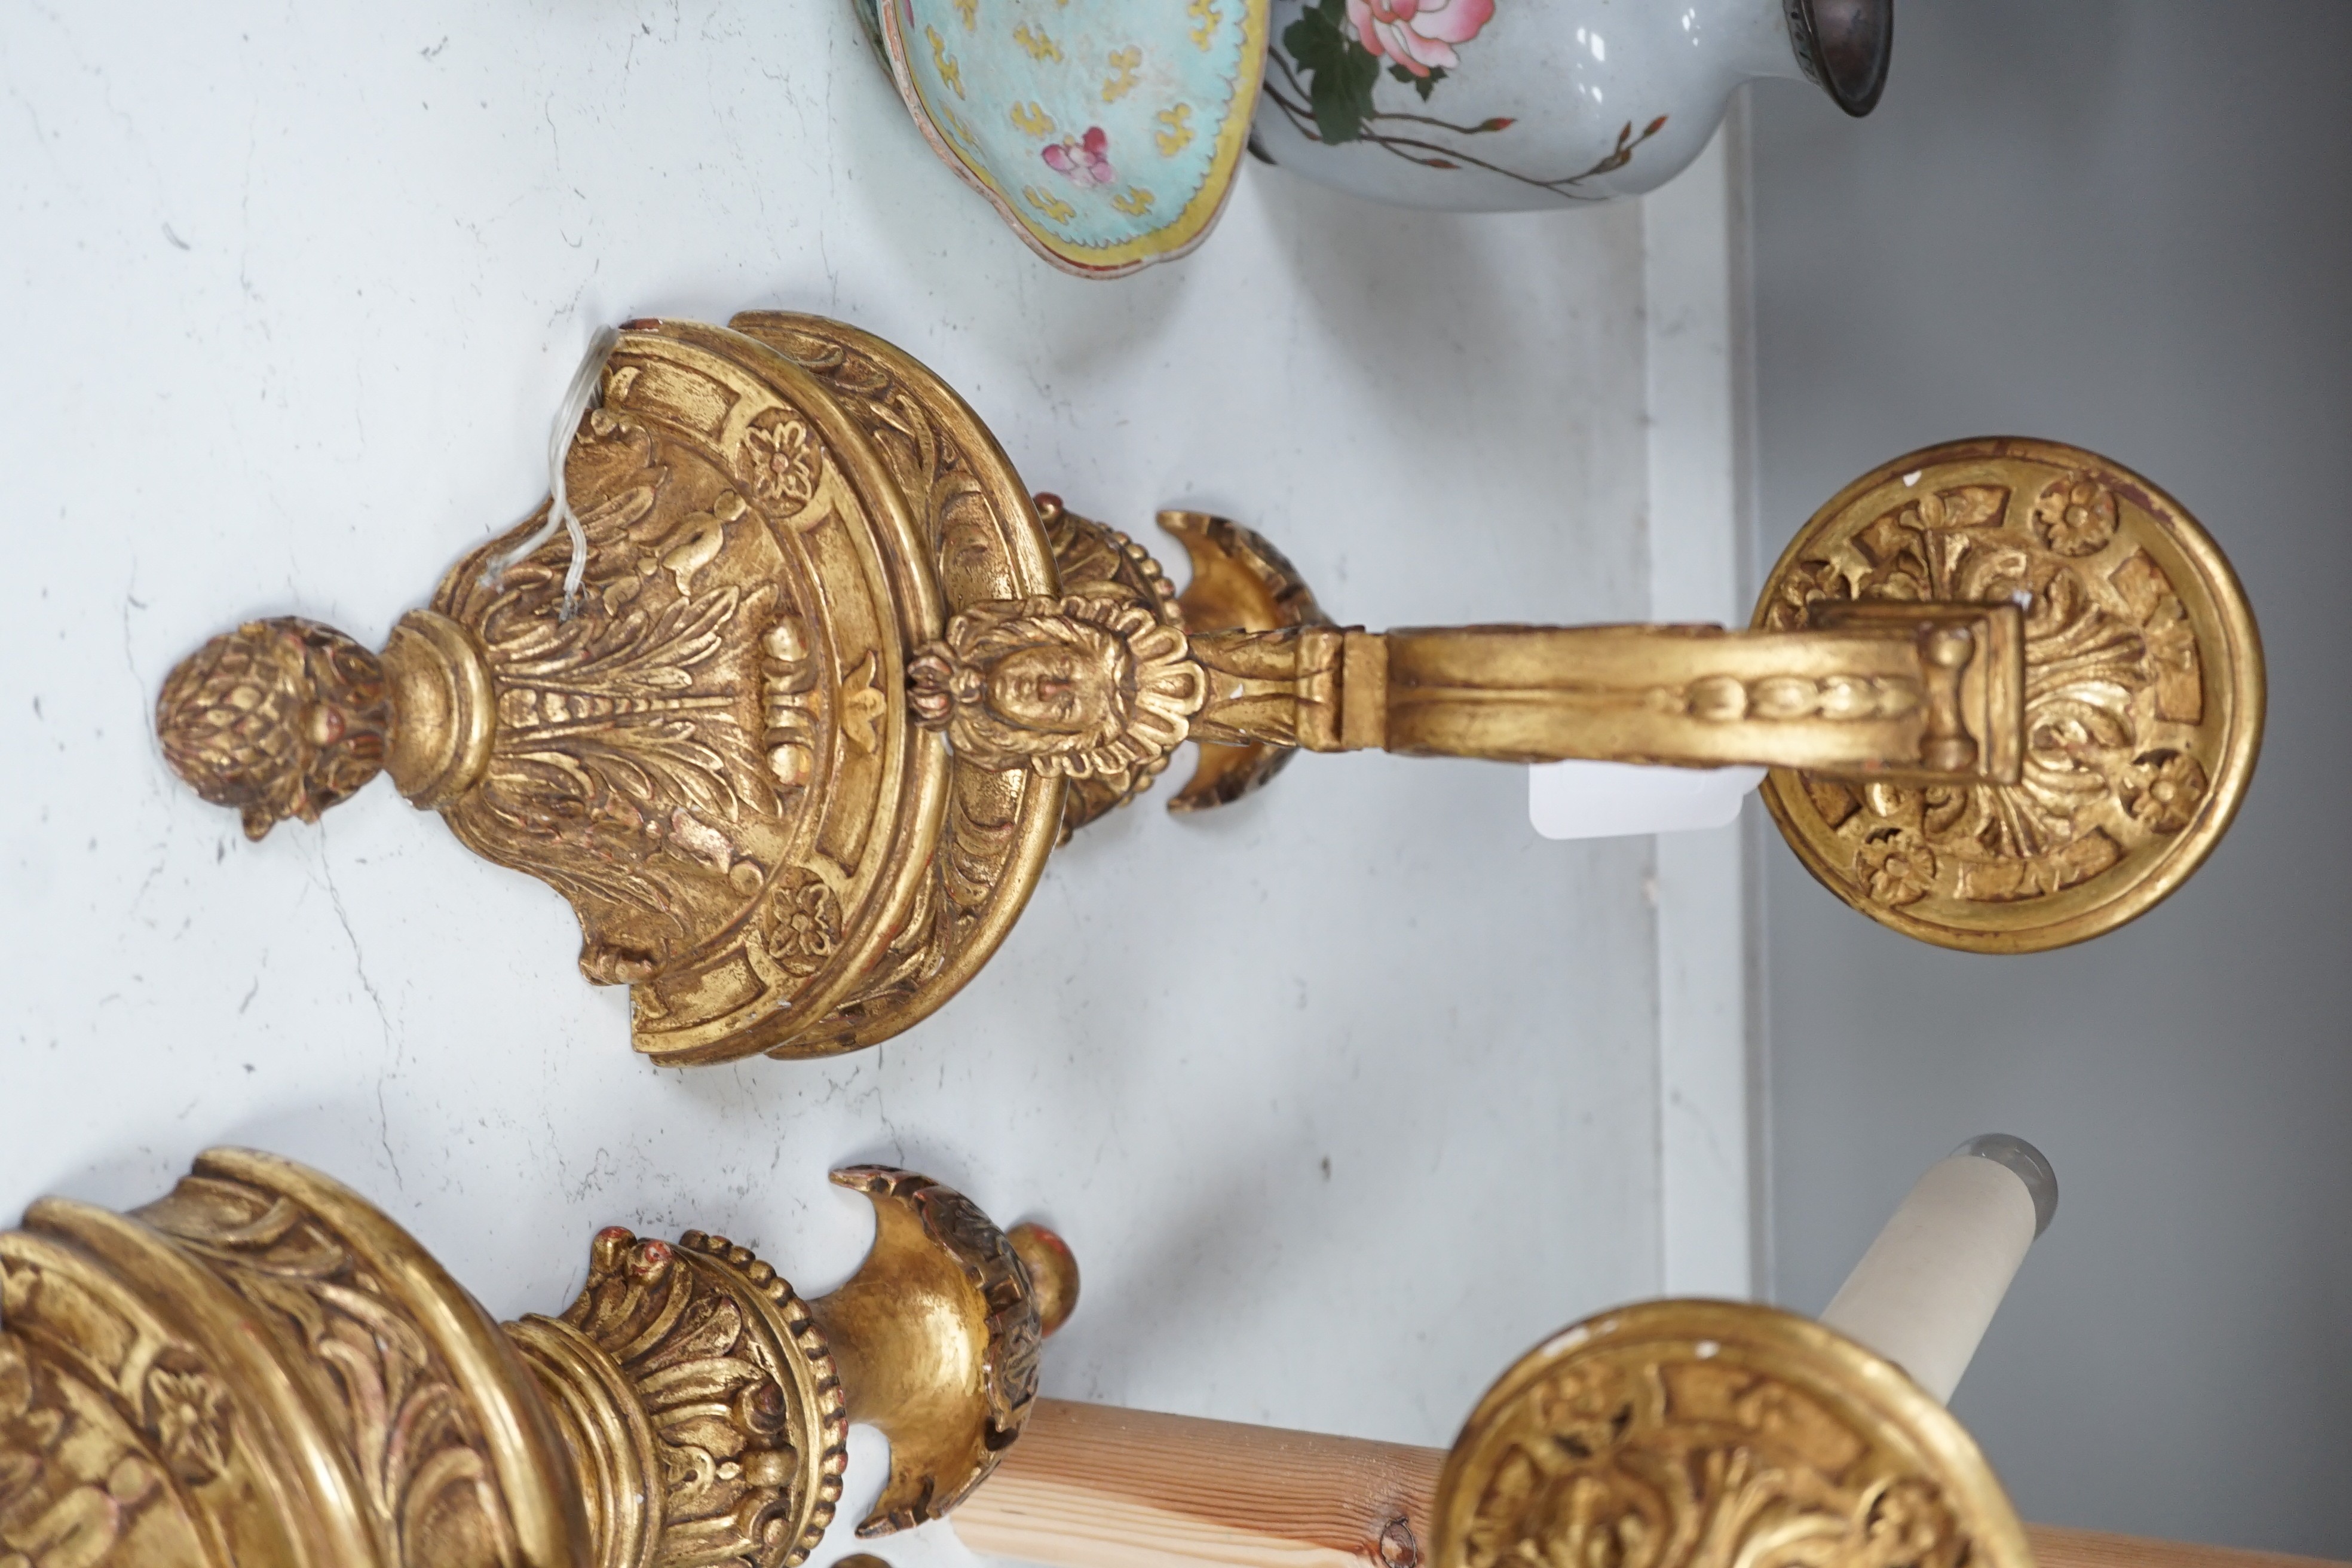 A pair of giltwood decorative single branch wall sconces - approx 50cm long